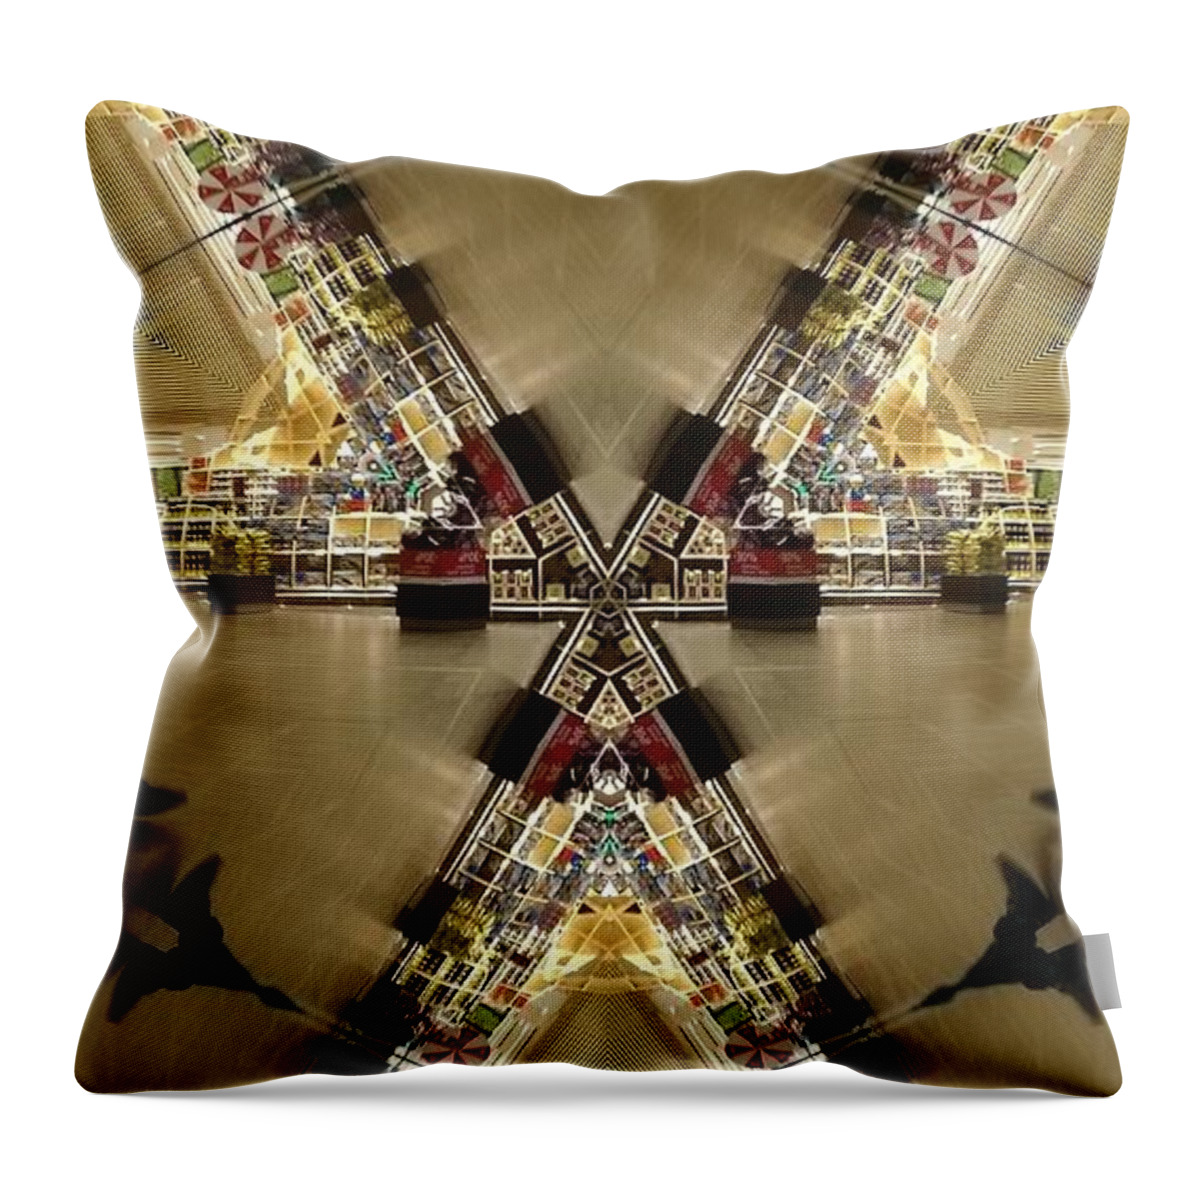 Airplane Throw Pillow featuring the photograph Empty Airport by Alexandra Vusir